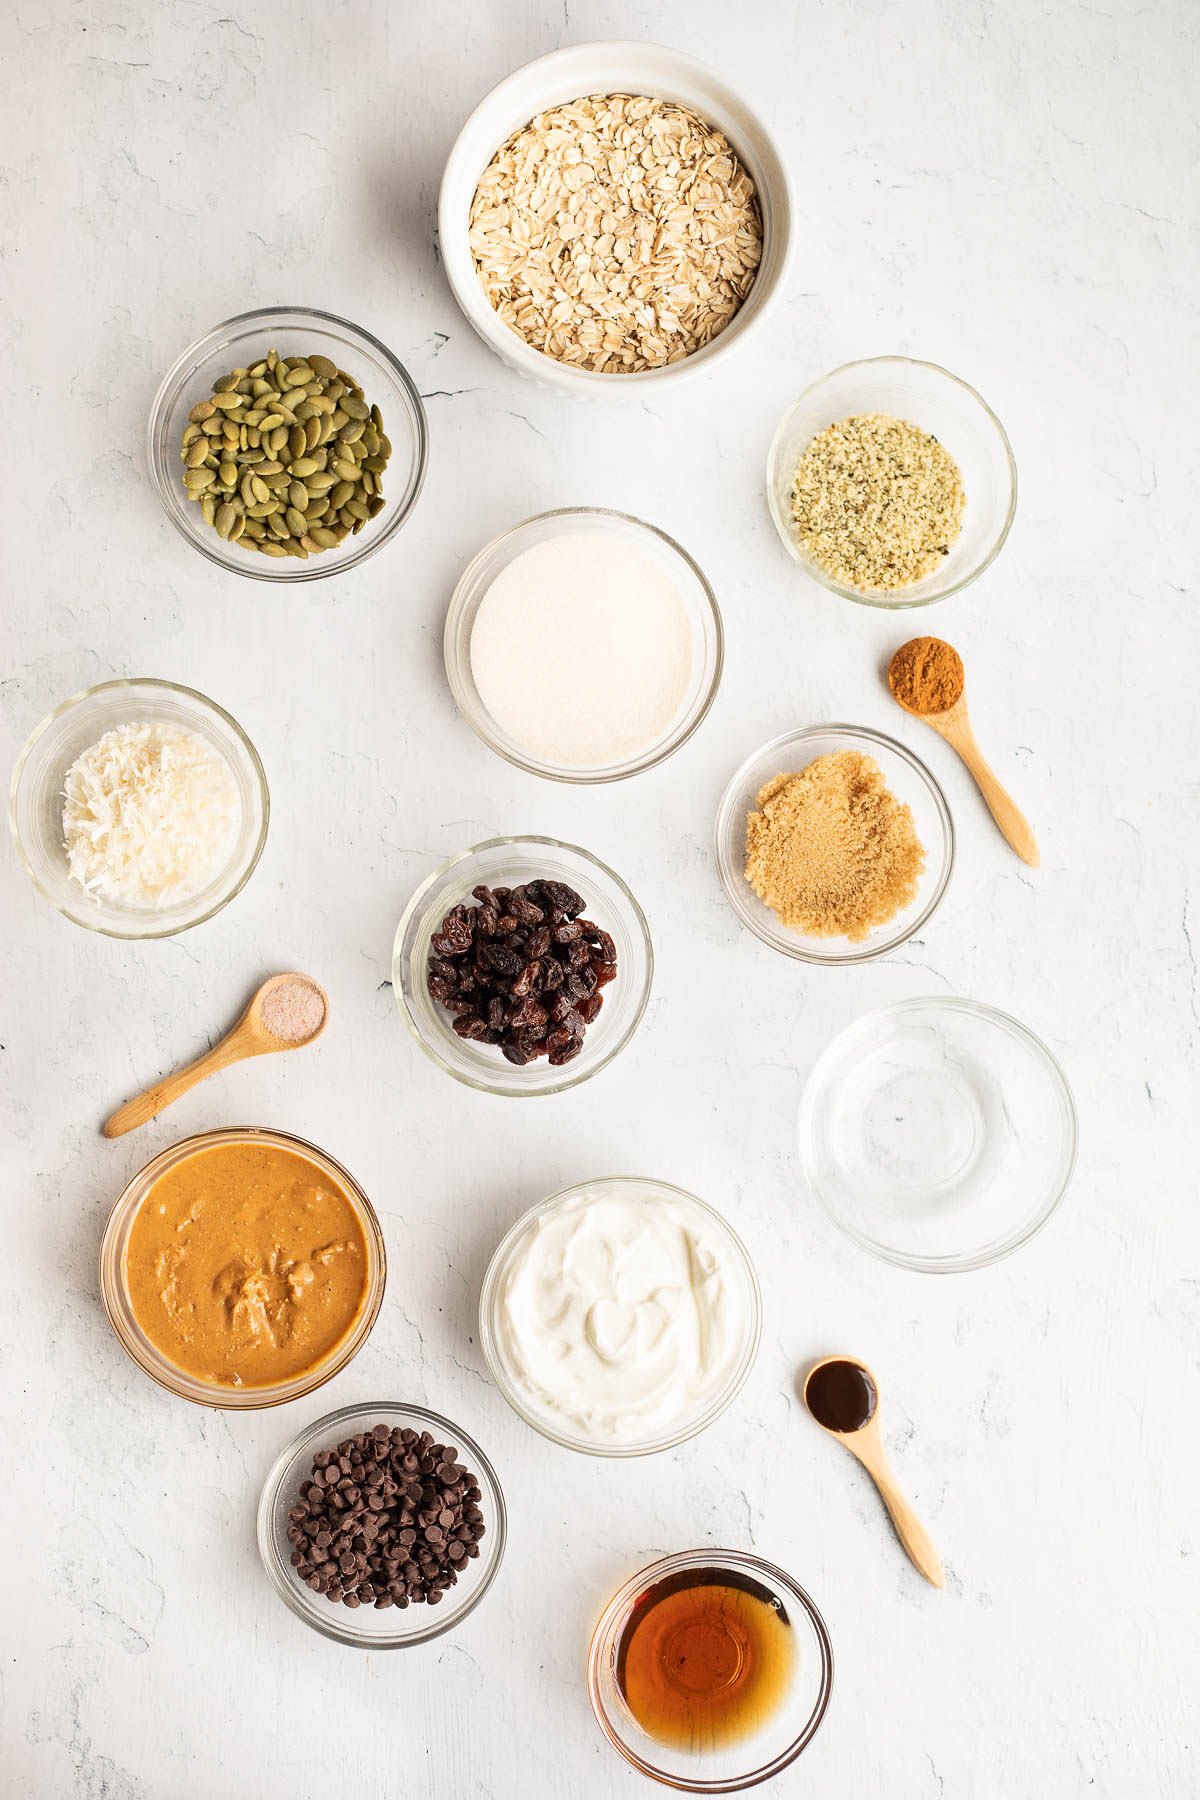 Ingredients for homemade protein bars.